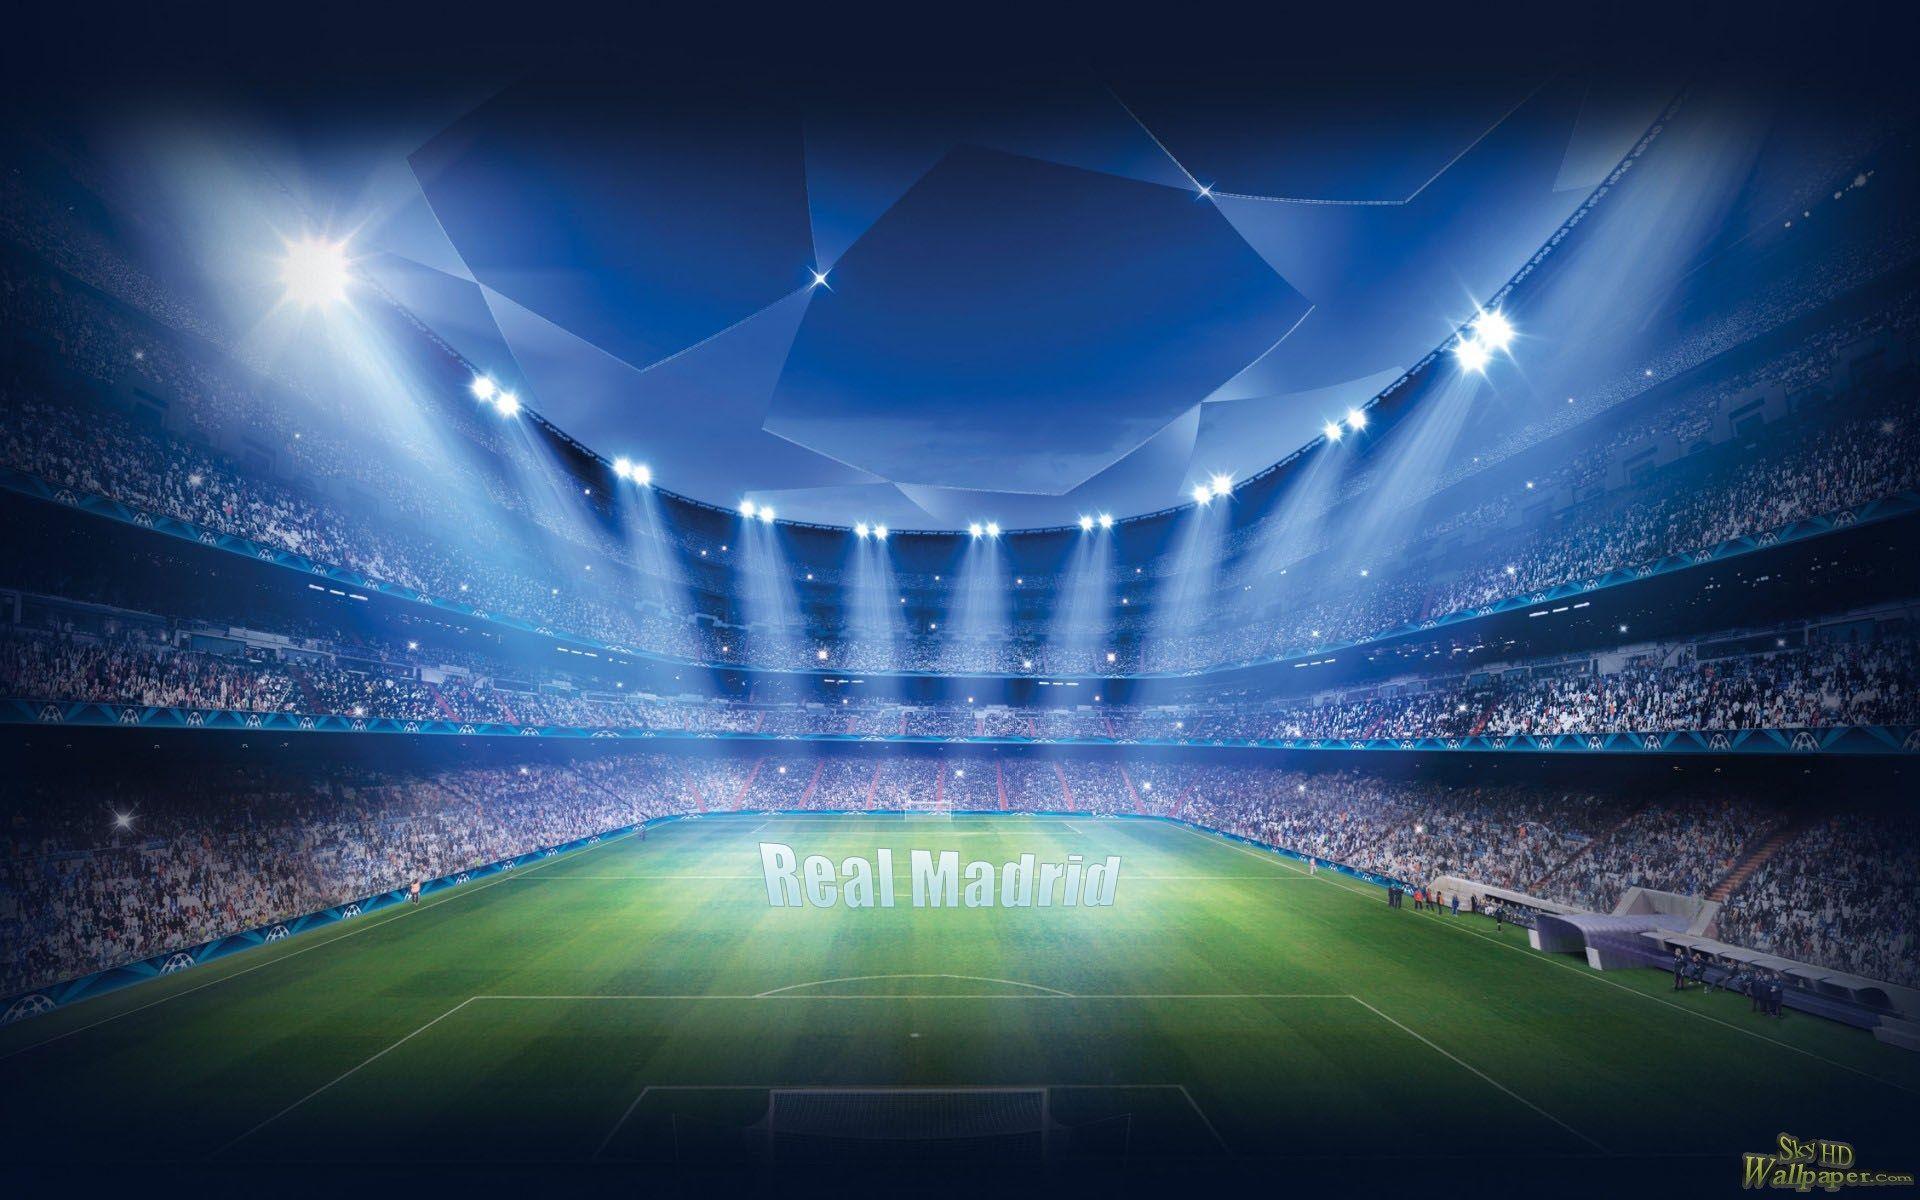 Real Madrid Wallpapers HD free download